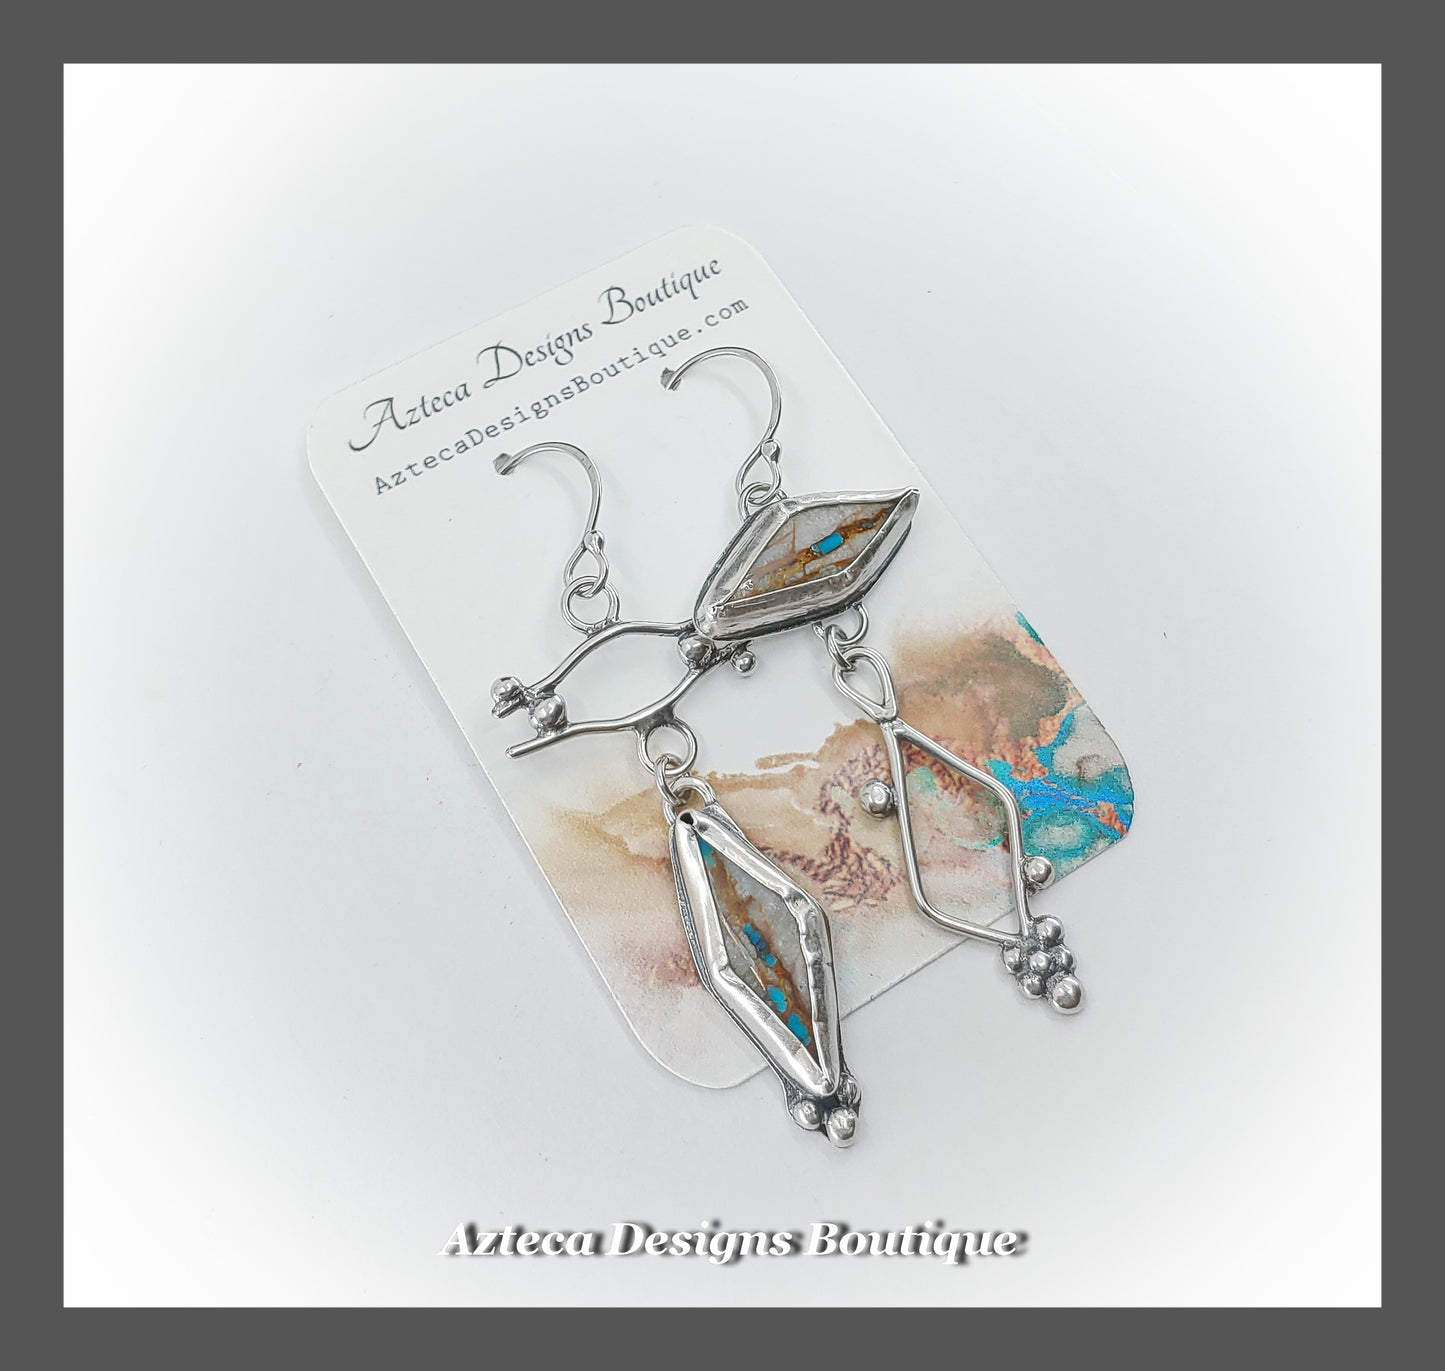 Royston Ribbon Turquoise + Hand Fabricated Argentium Silver + Asymmetrical Earrings